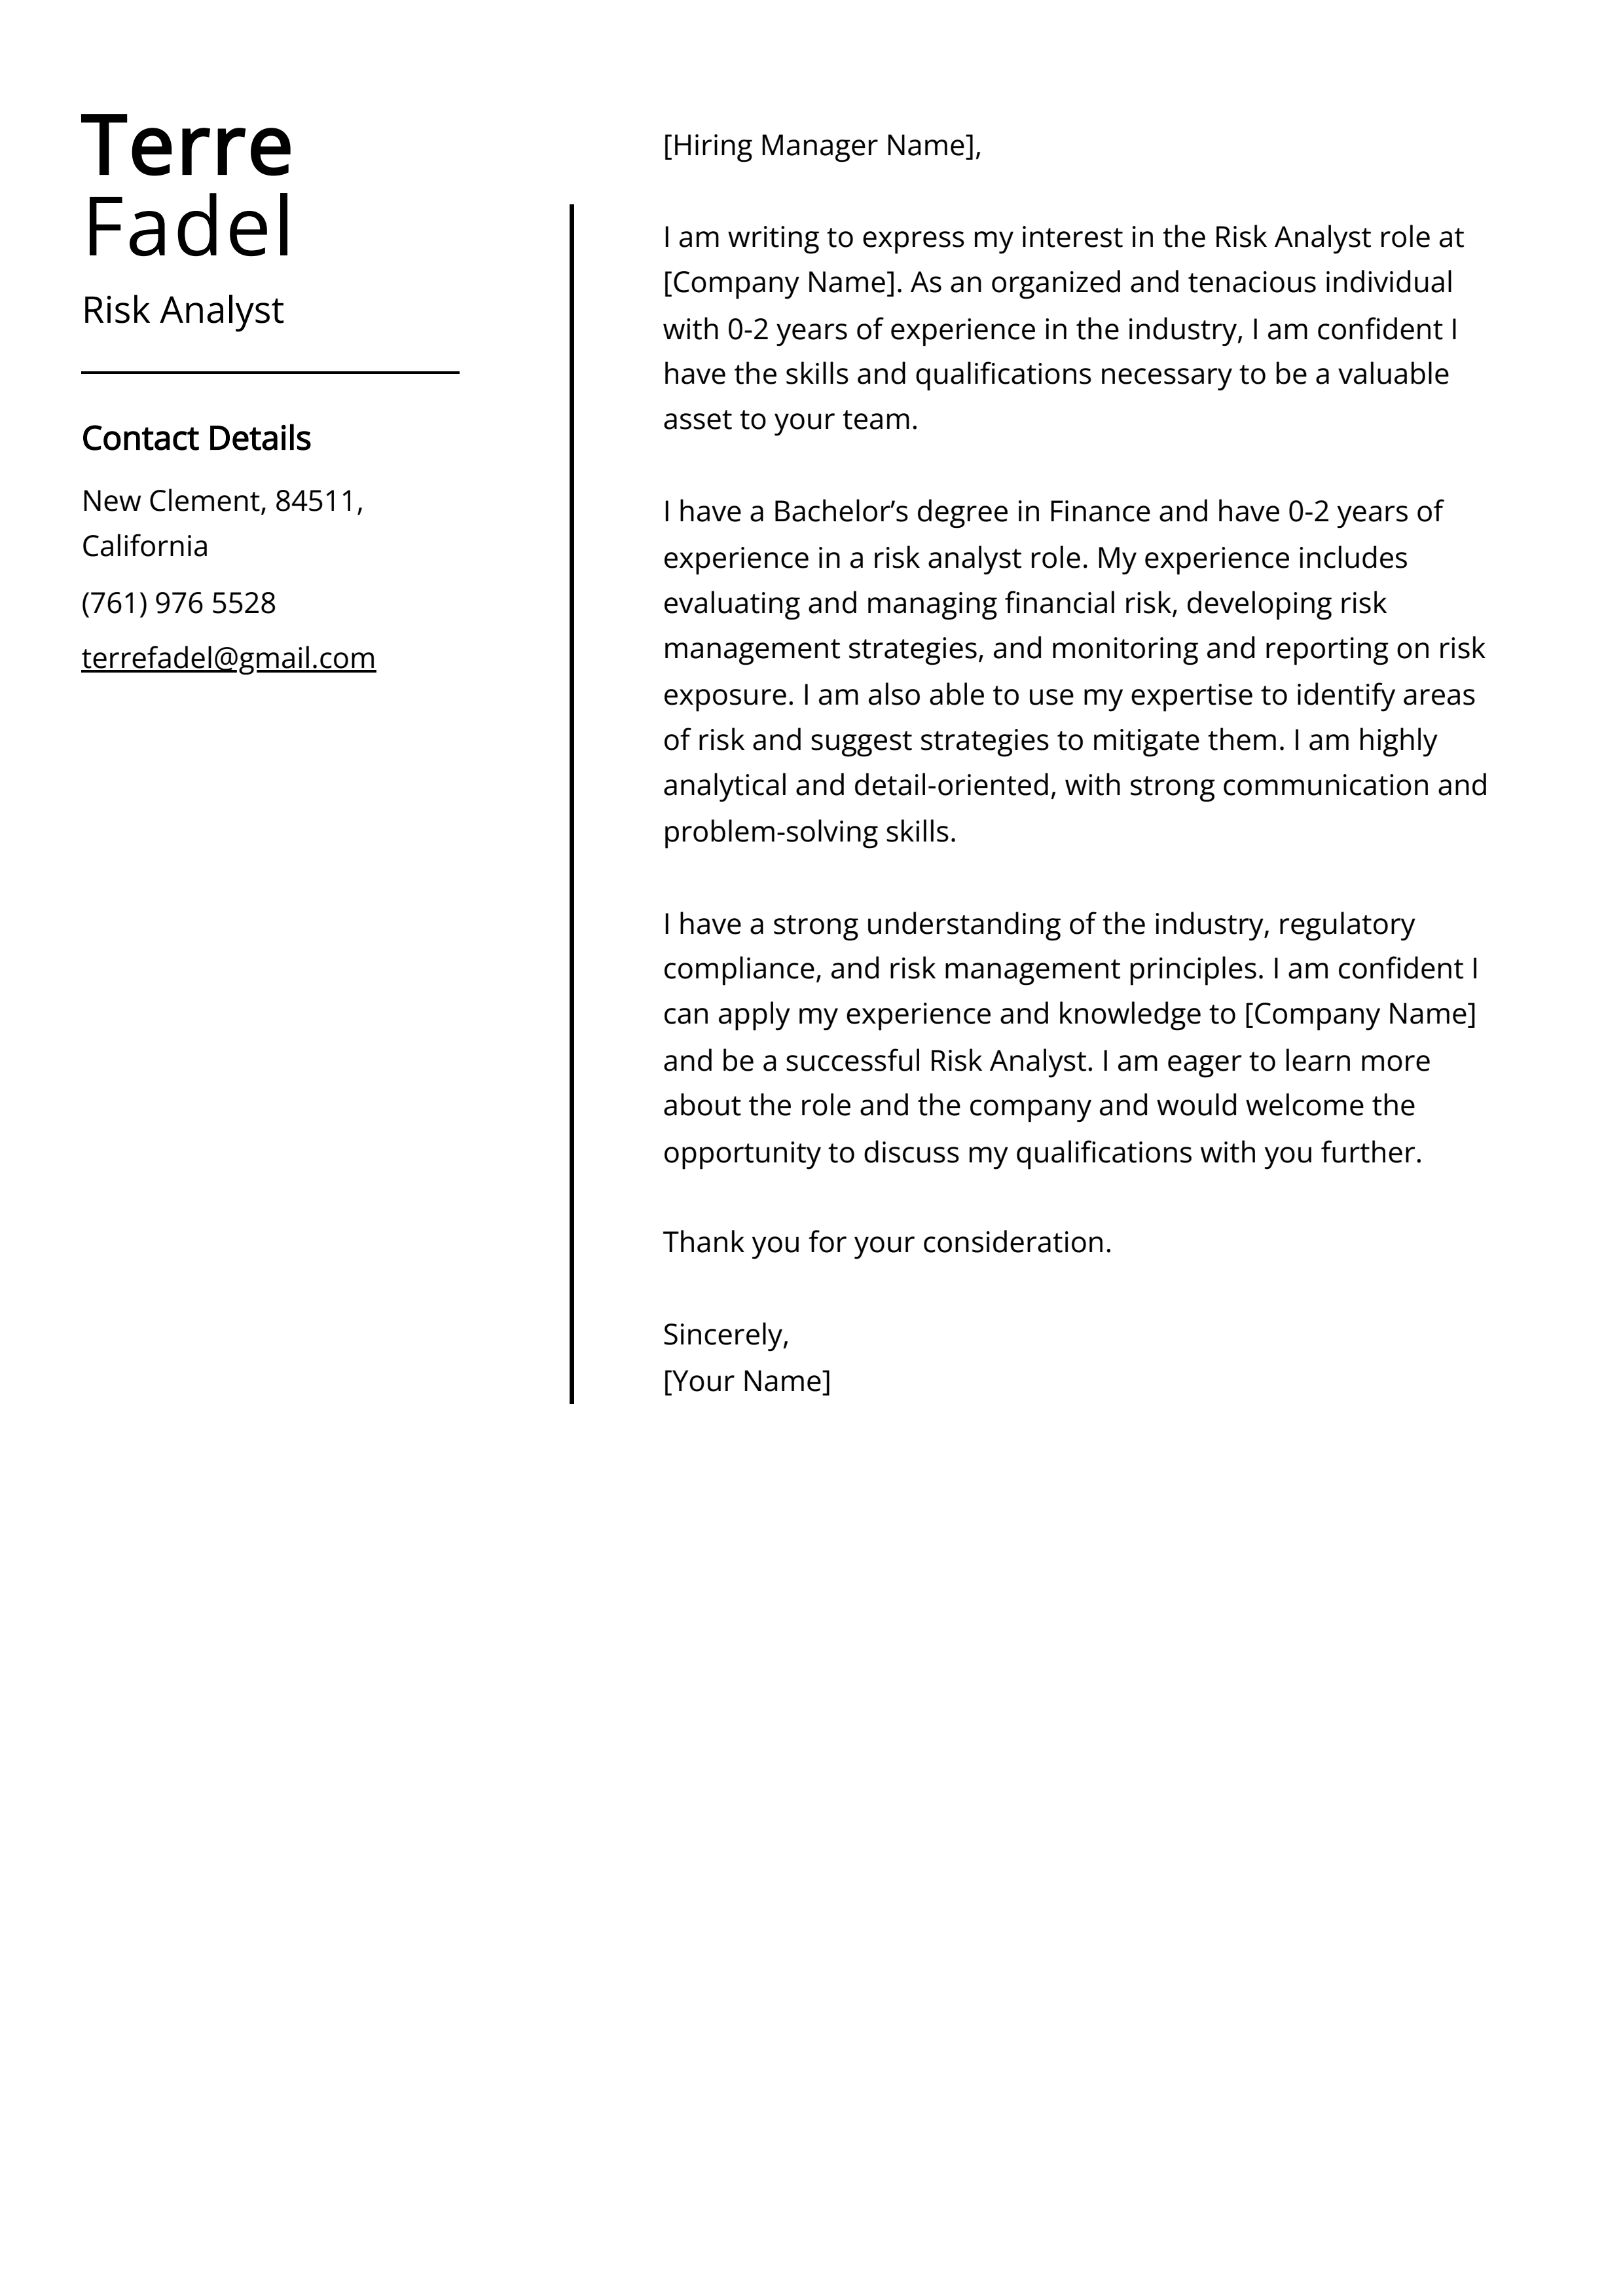 Risk Analyst Cover Letter Example